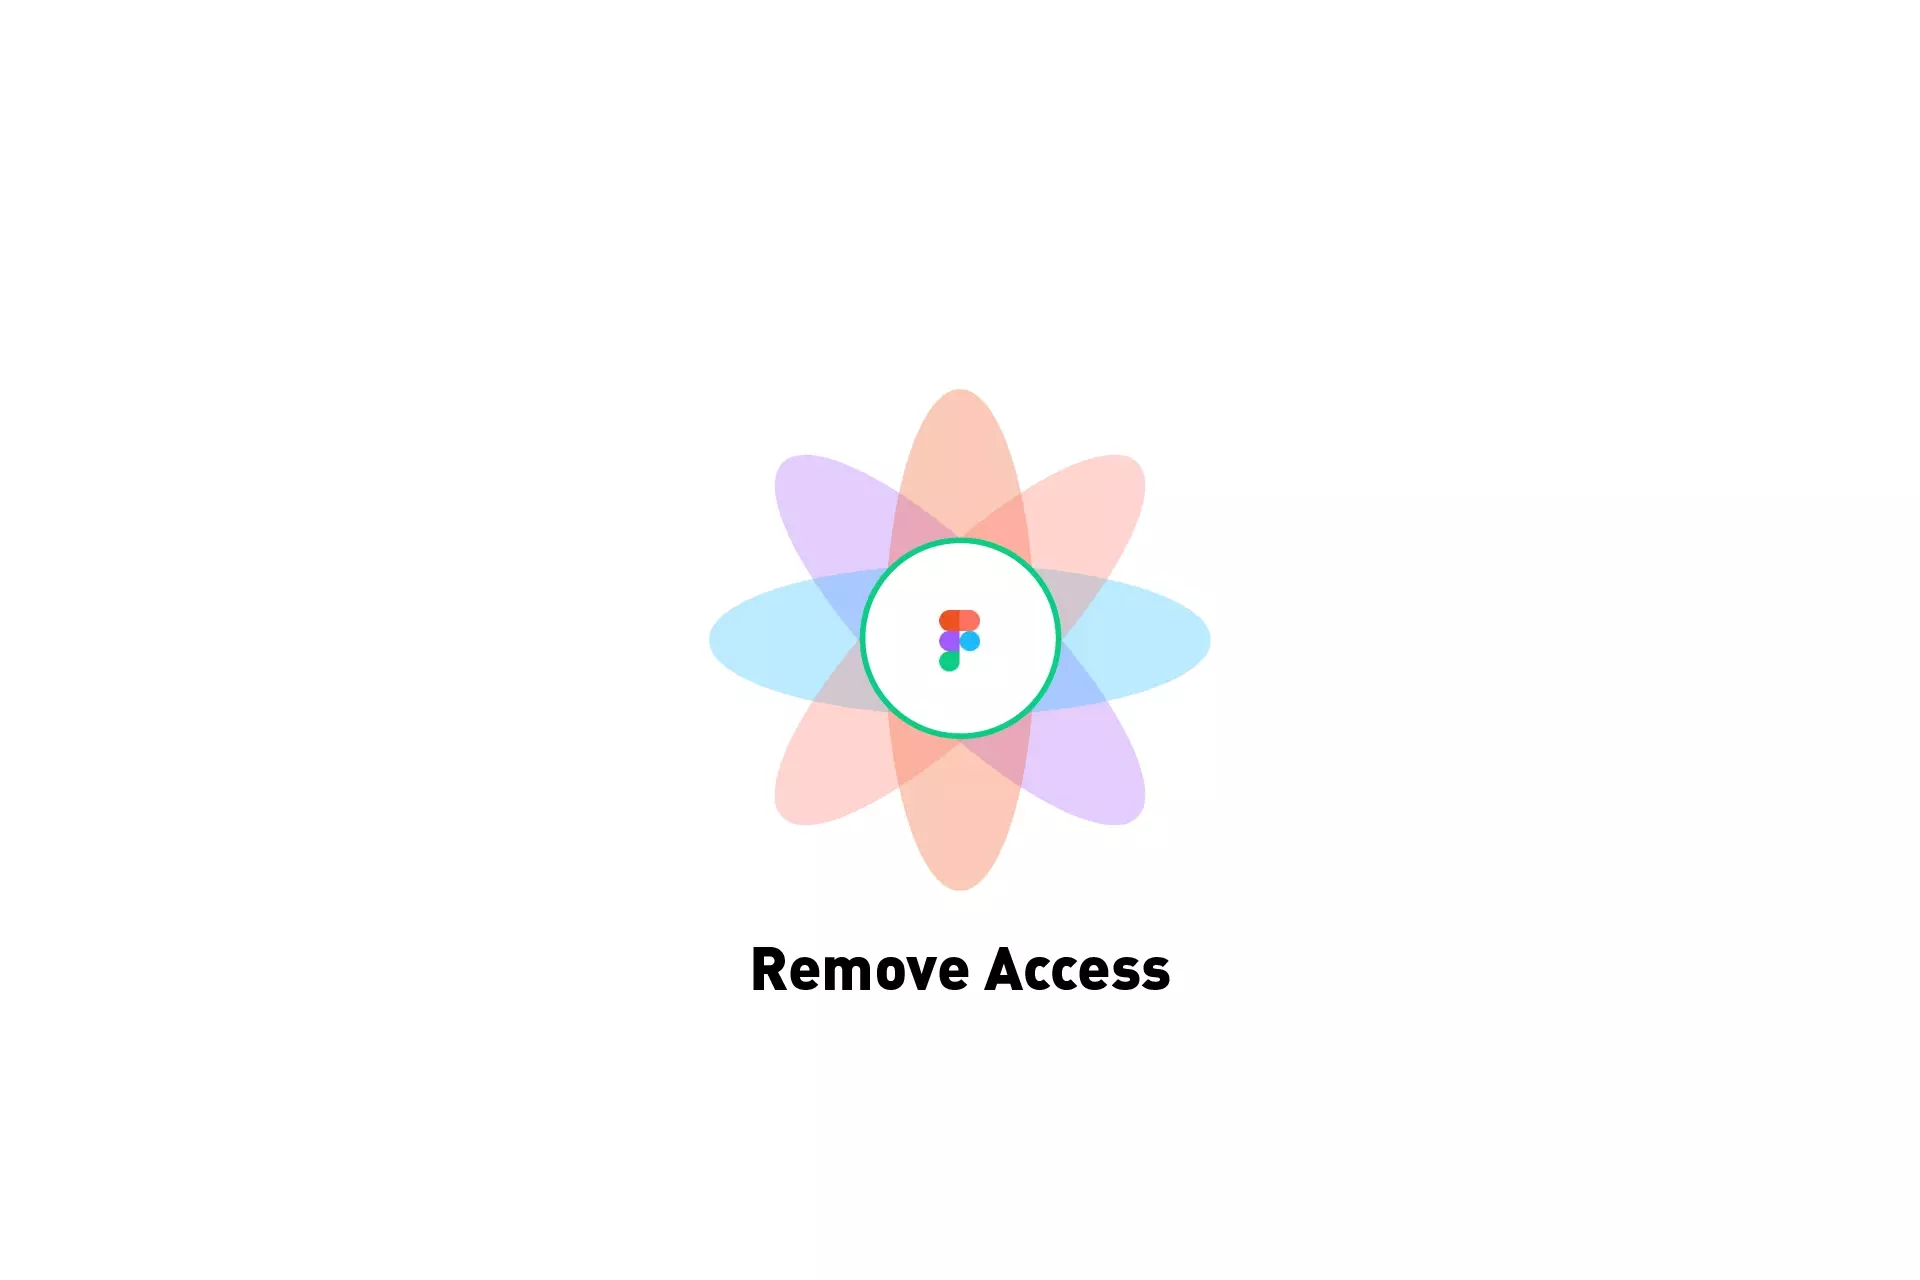 A flower that represents Figma with the text "Remove Access" beneath it.